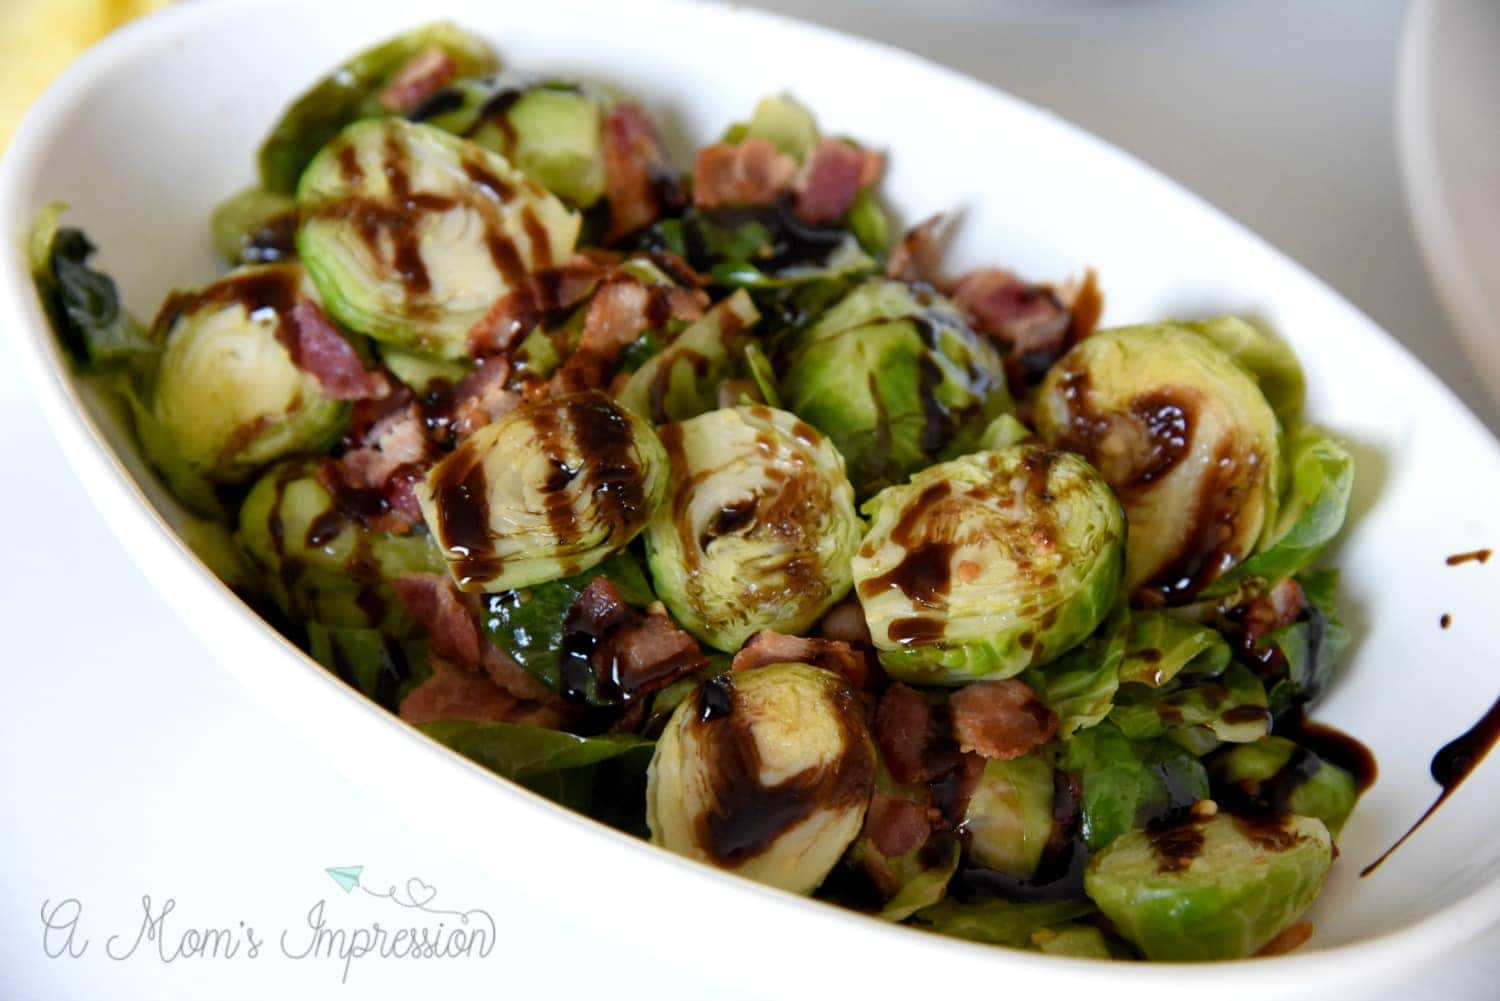 Bacon and Balsalmic Brussel Sprouts final dish in a white oval bowl